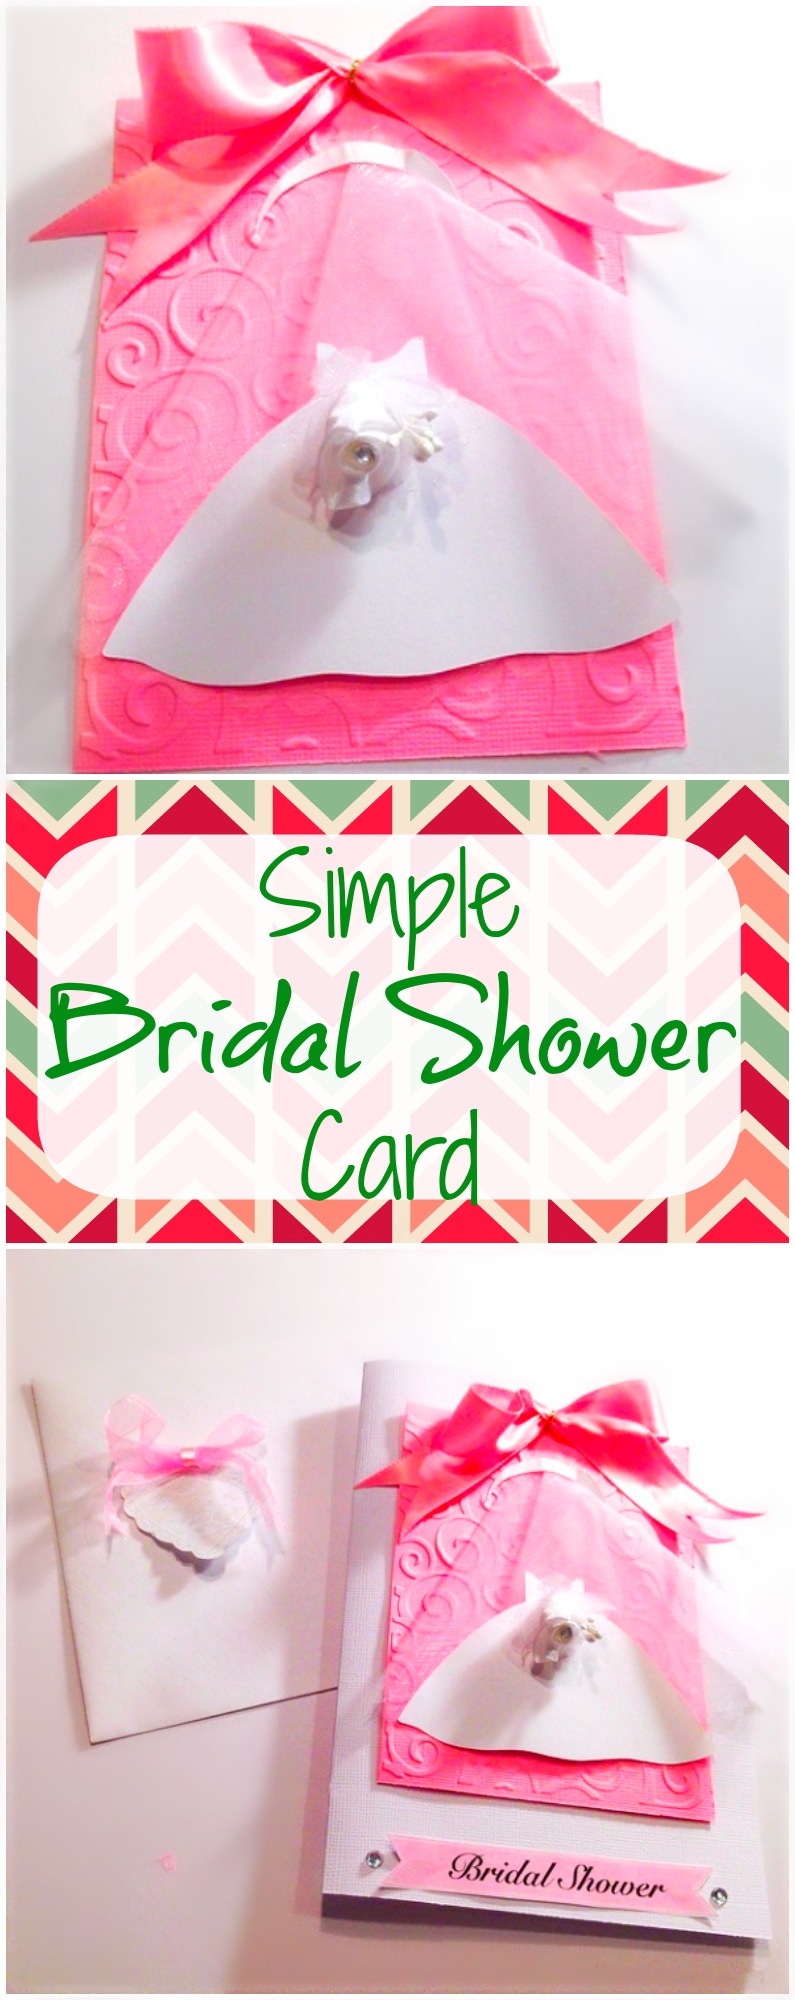 Simple Bridal Shower Cards